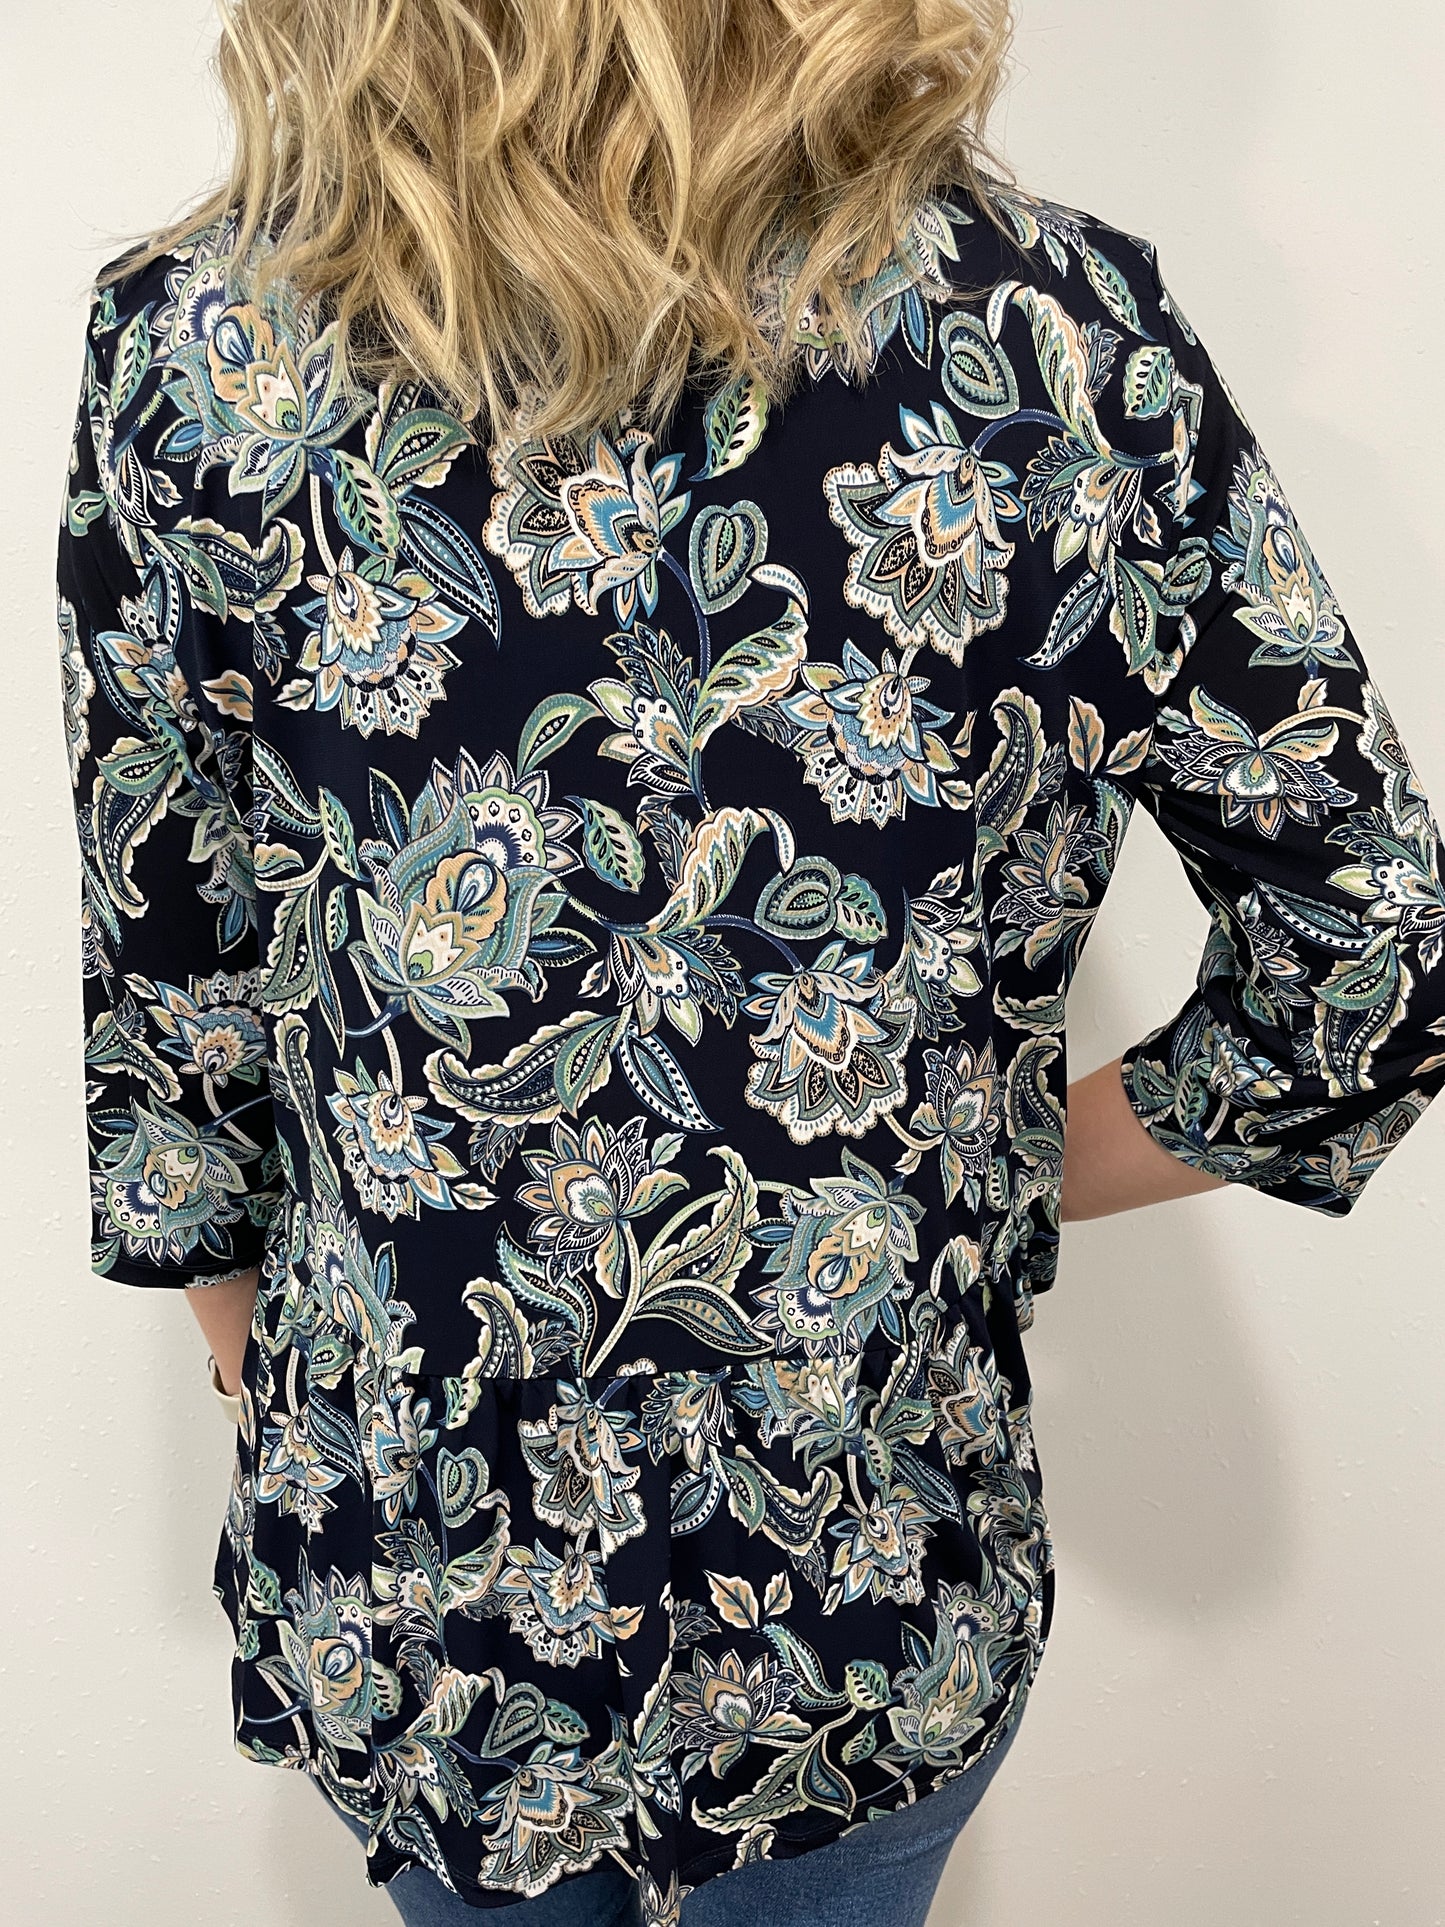 KEEP IT TOGETHER PAISLEY PRINT TOP - BLUE MULTI